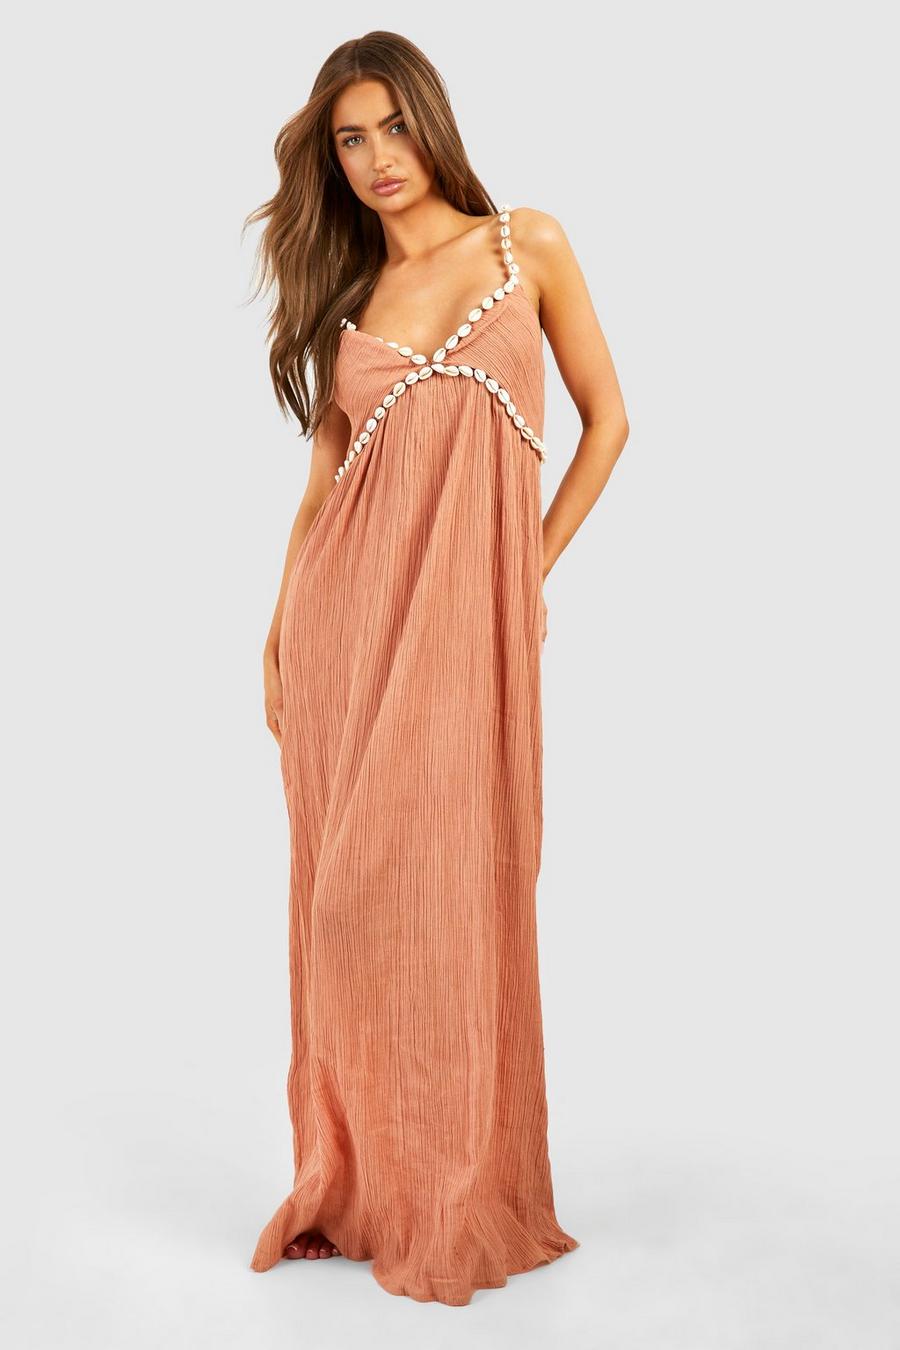 Tan Embroidered Cheesecloth Beach Dress